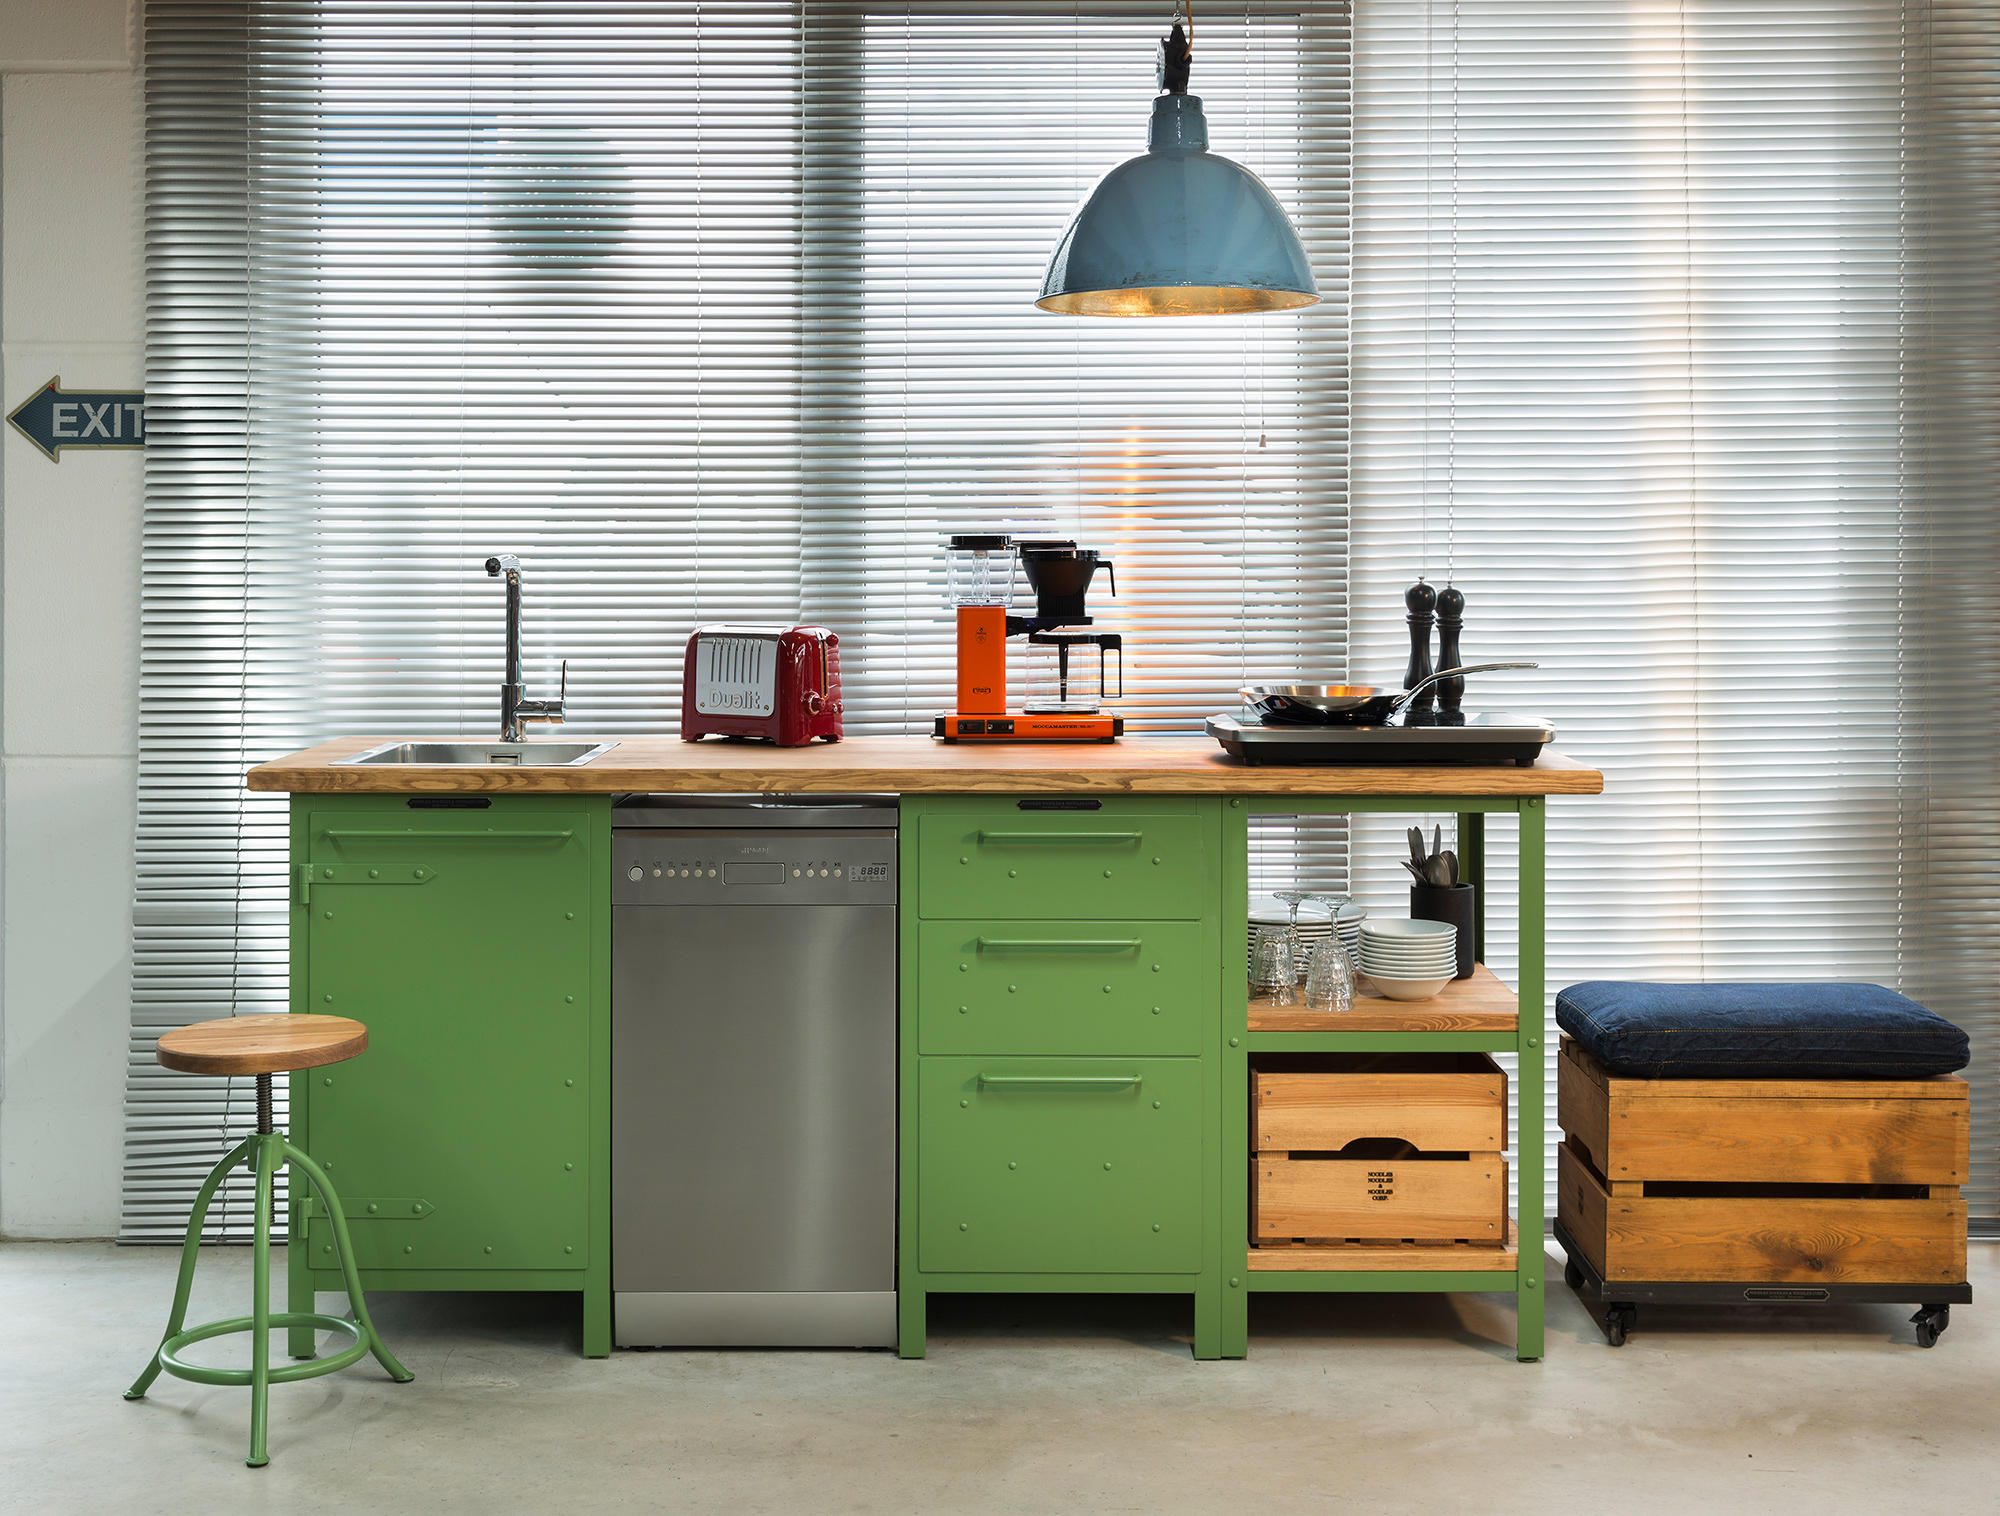 Authentic Kitchen Furniture and Industrial Design